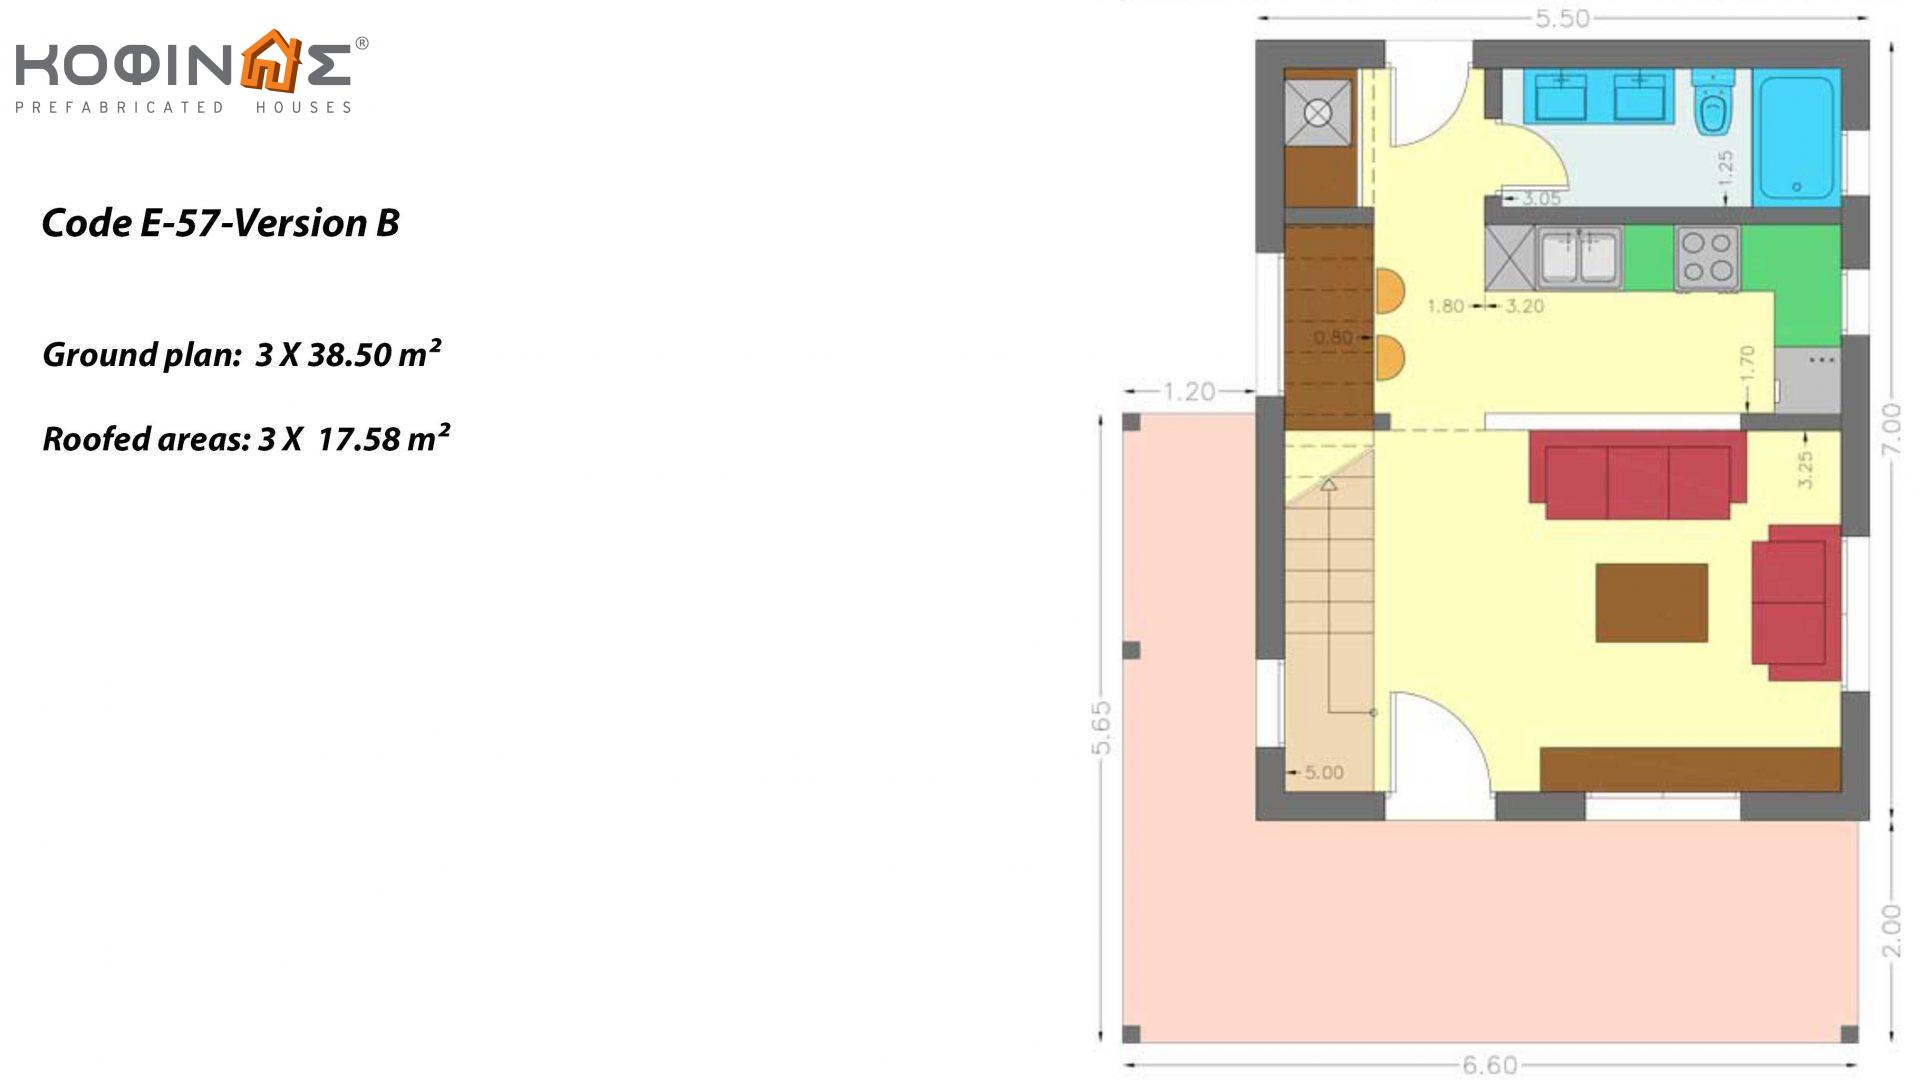 Complex of 1-story houses with attics E-57, total surface of 3 x 57,75 = 173,25 m², roofed areas 52.74 m²